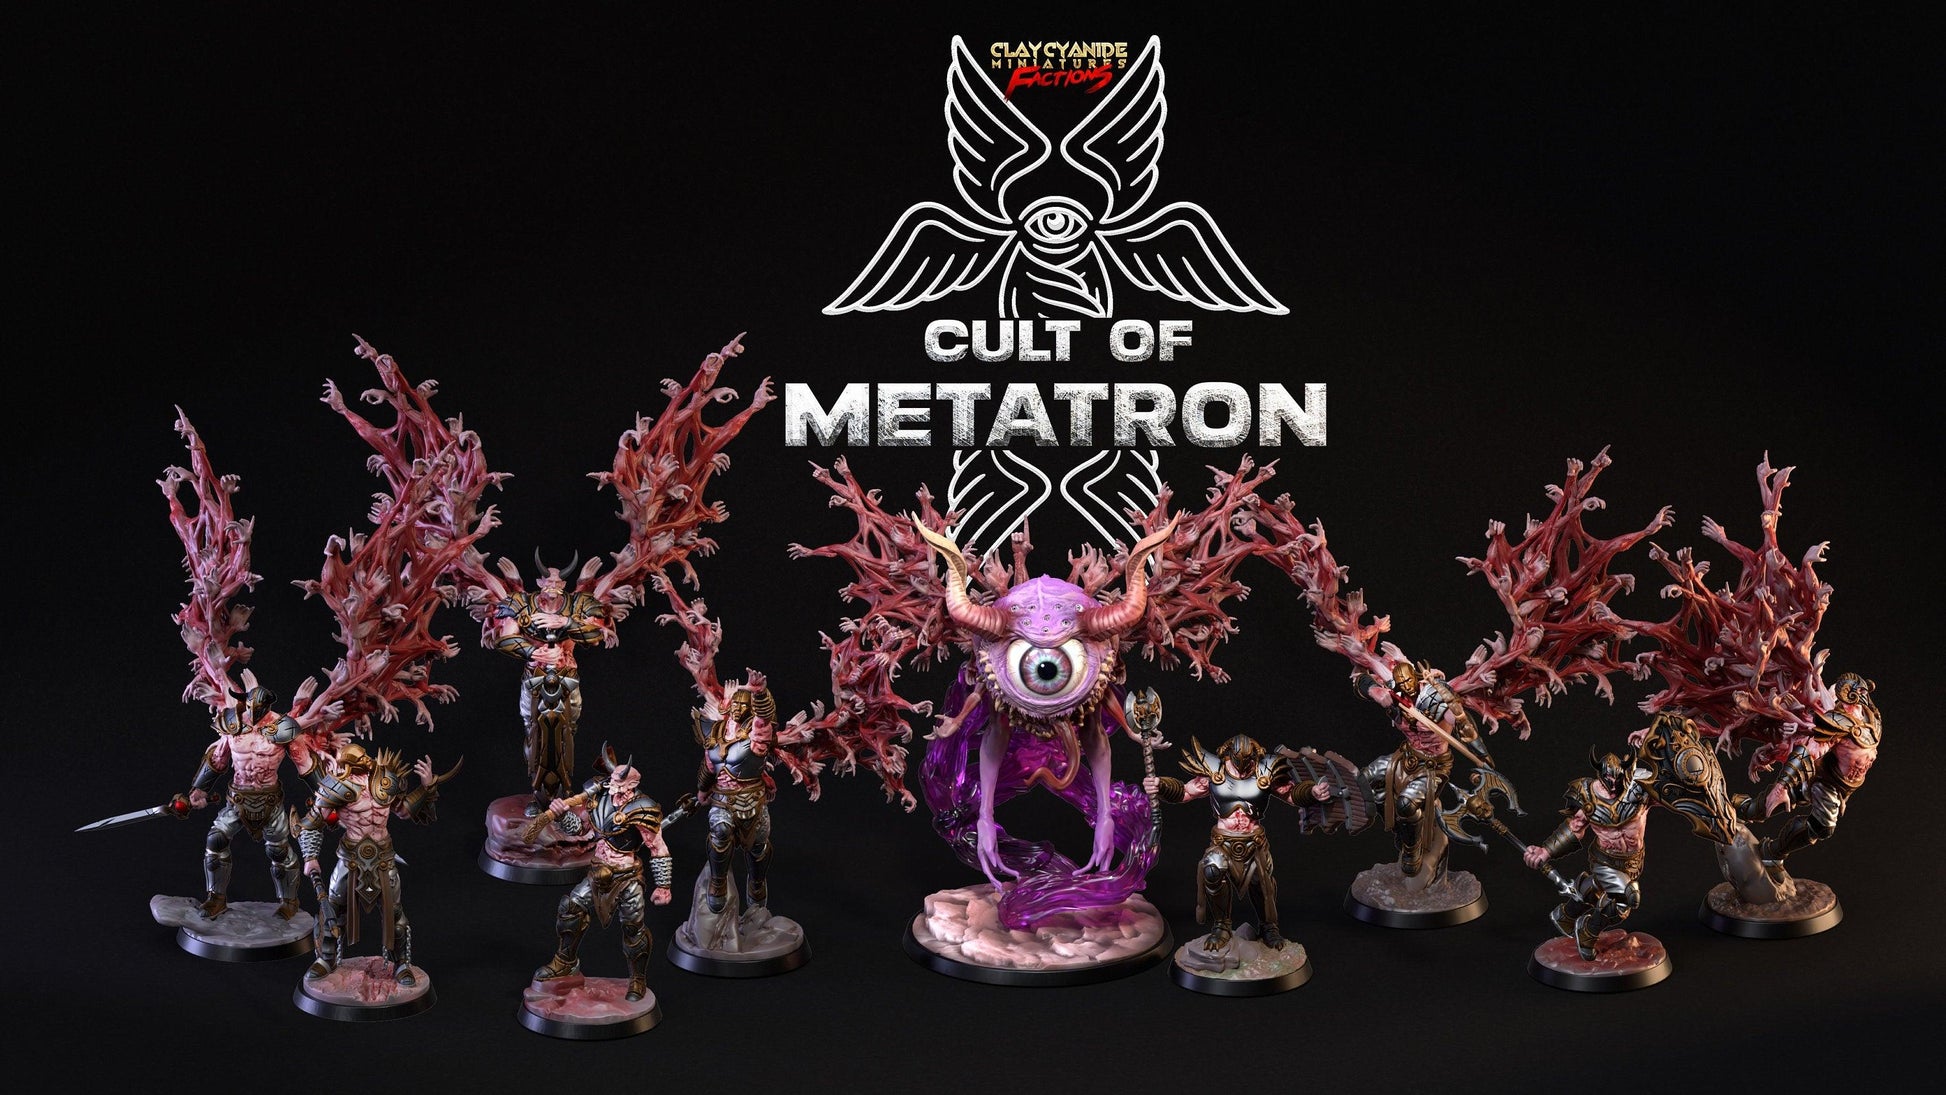 Demon Miniature | Clay Cyanide | Cult of Metatron | Tabletop Gaming | DnD Miniature | Dungeons and Dragons | Monster miniatures - Plague Miniatures shop for DnD Miniatures